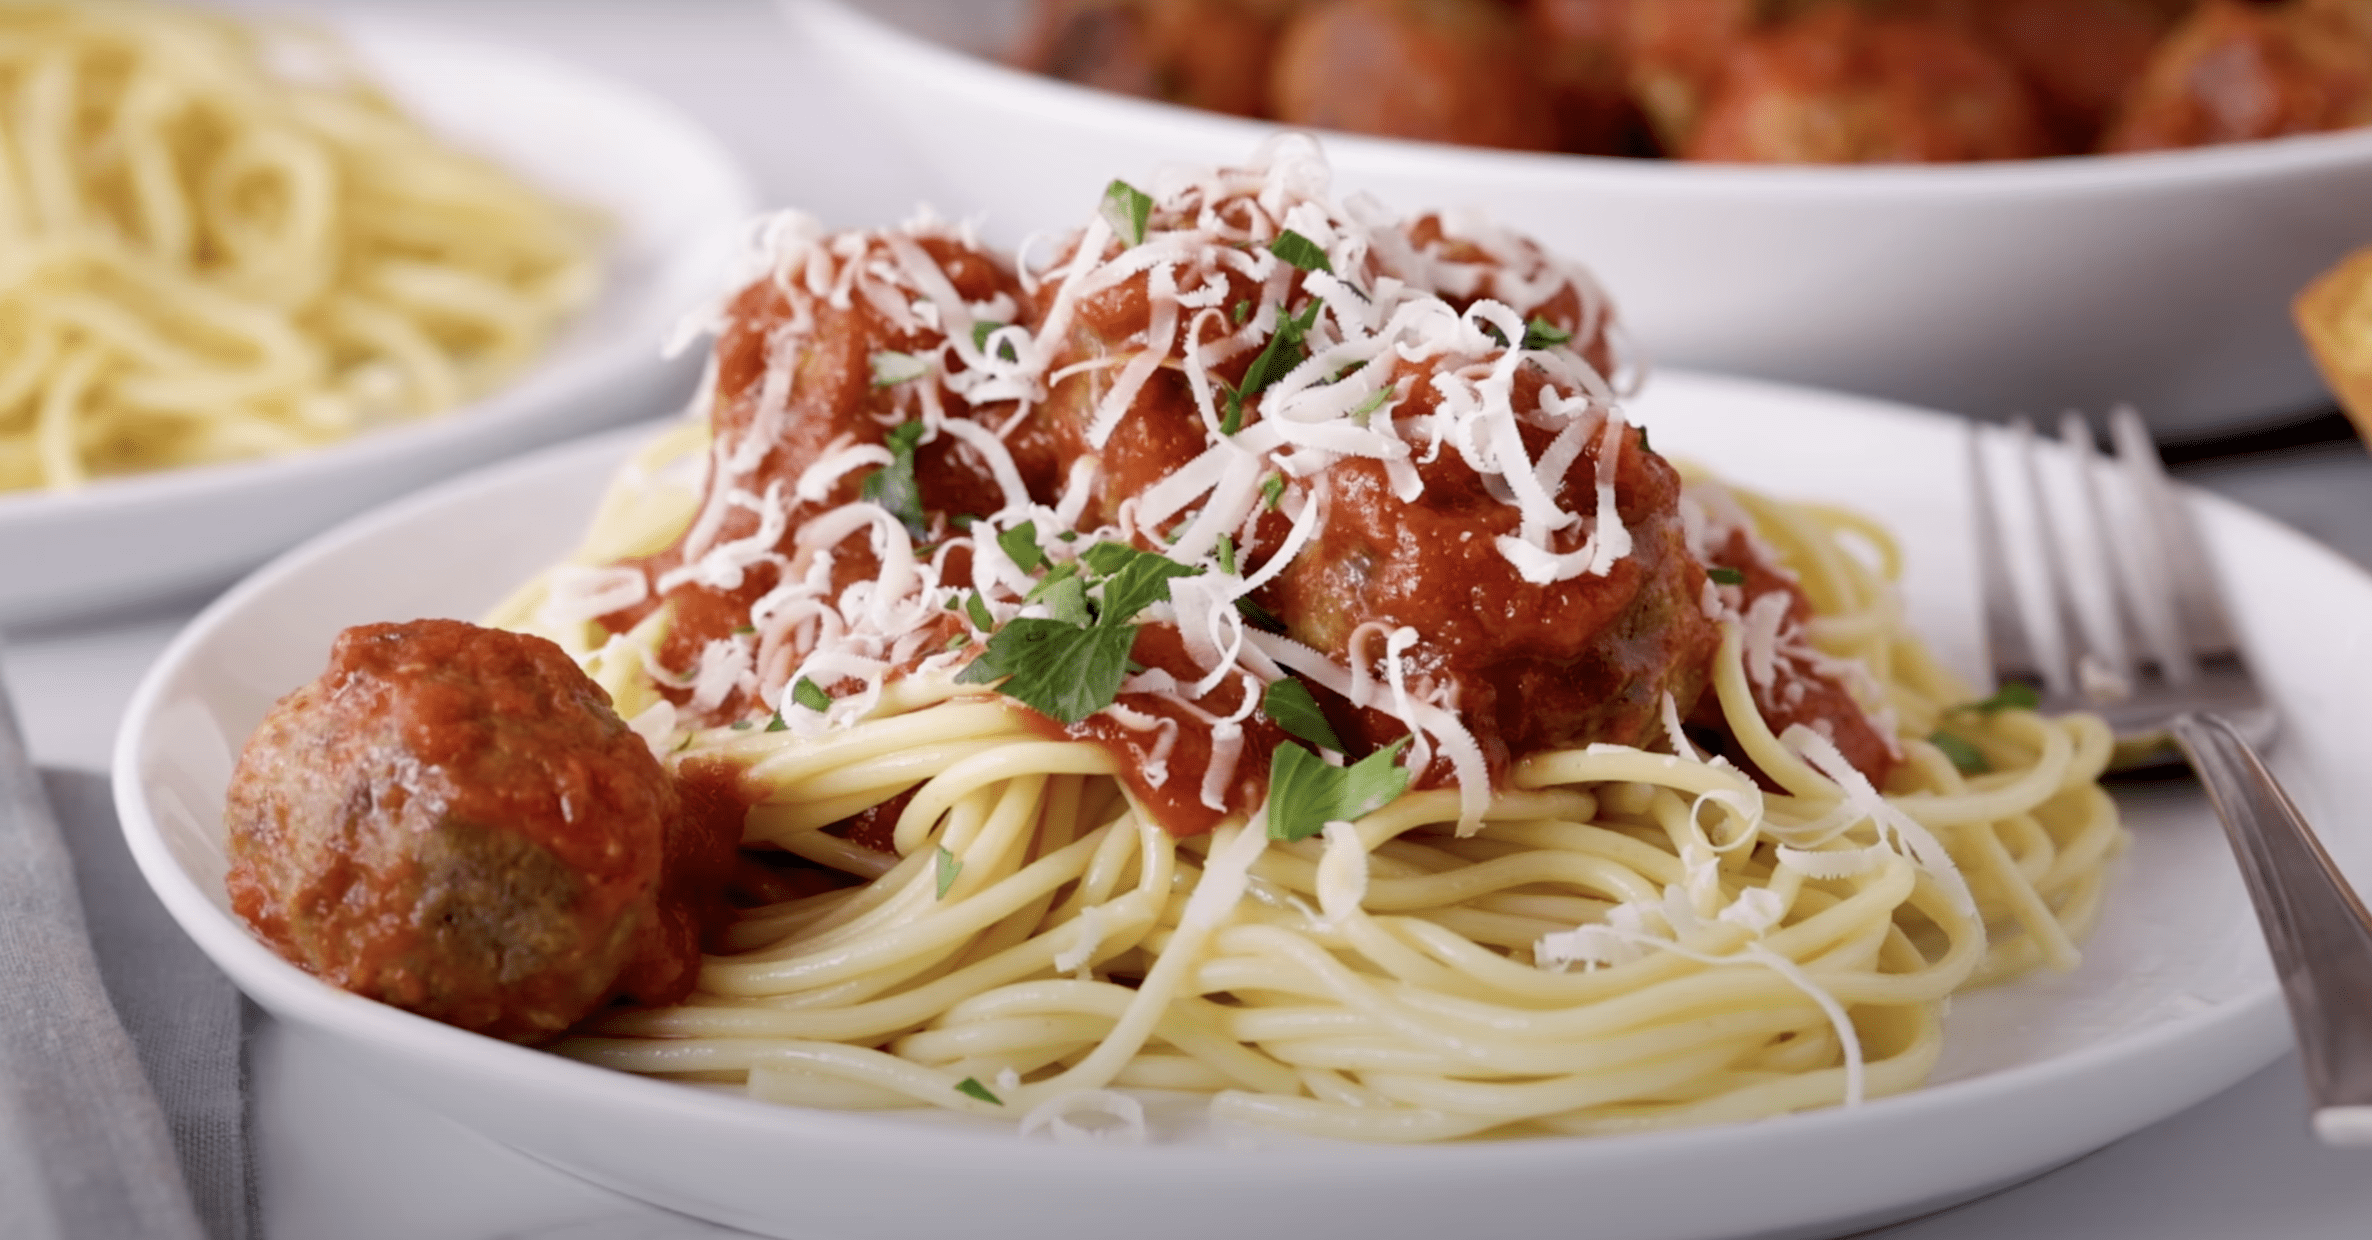 A white plate filled with meatballs lightly coated in a tomato sauce, on a bed of spaghetti, with herbs and parmesan cheese sprinkled on top. 